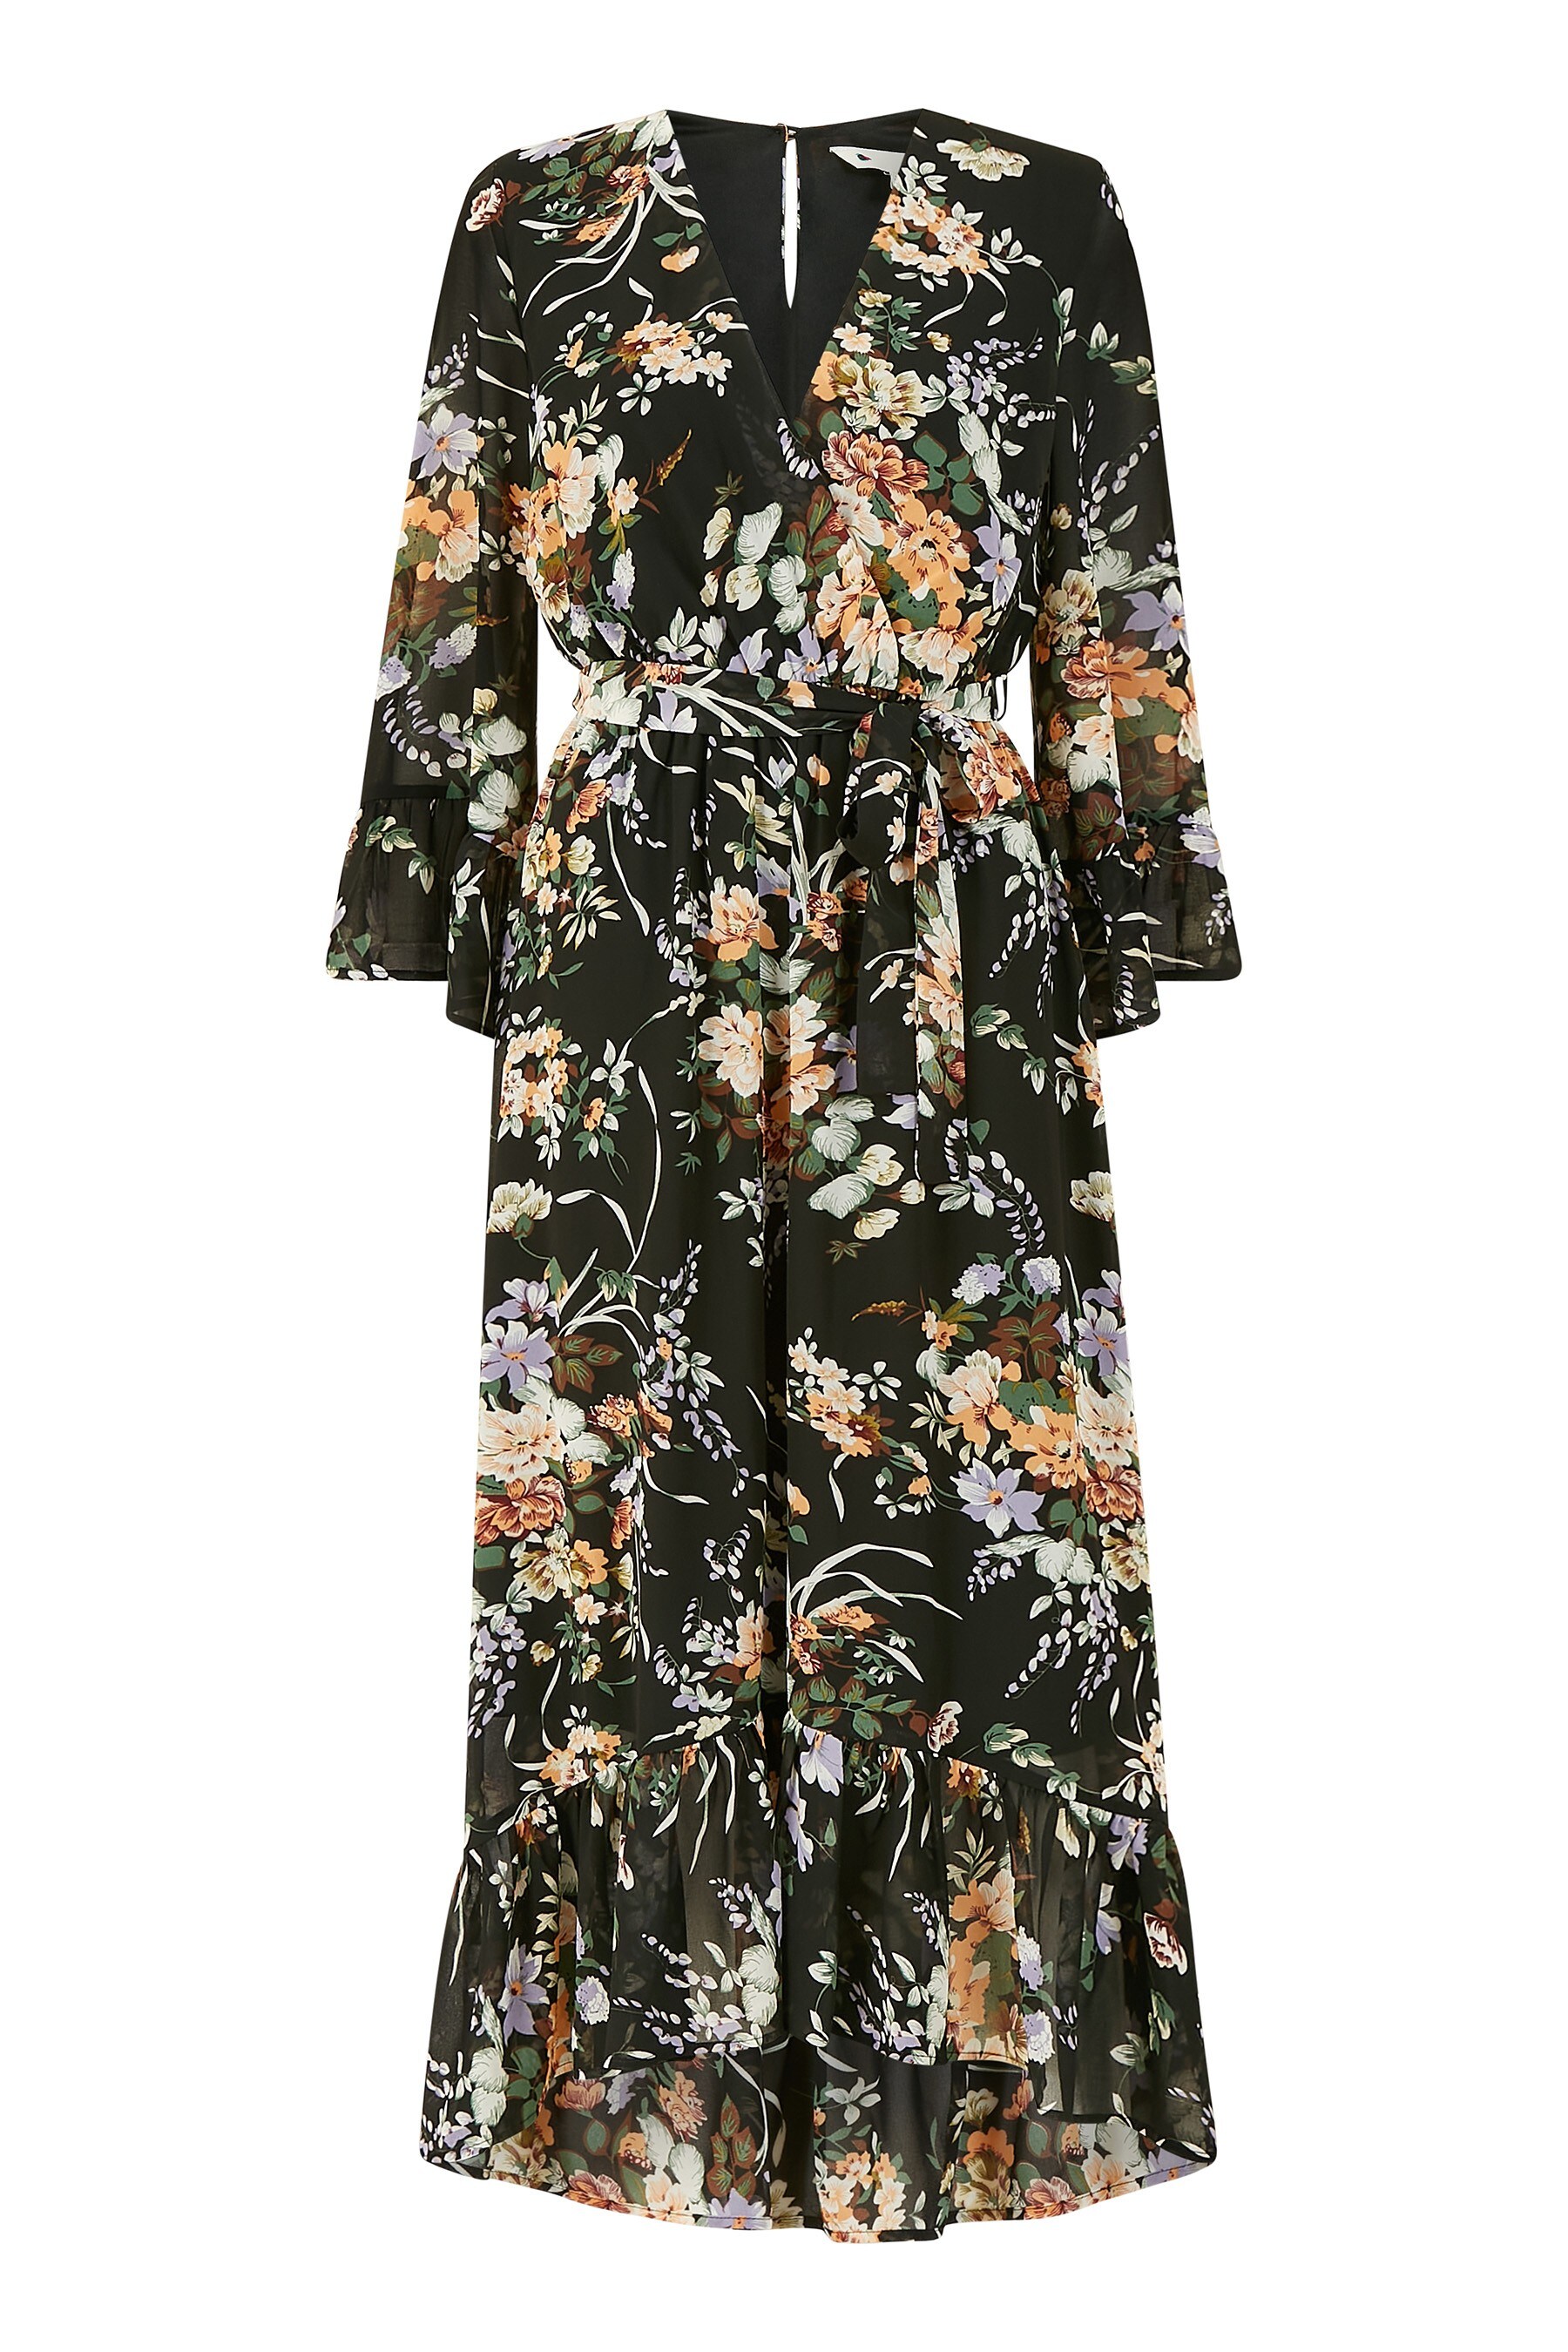 Buy Yumi Garden Floral Print Wyona Dress With Dipped Hem from the Next ...